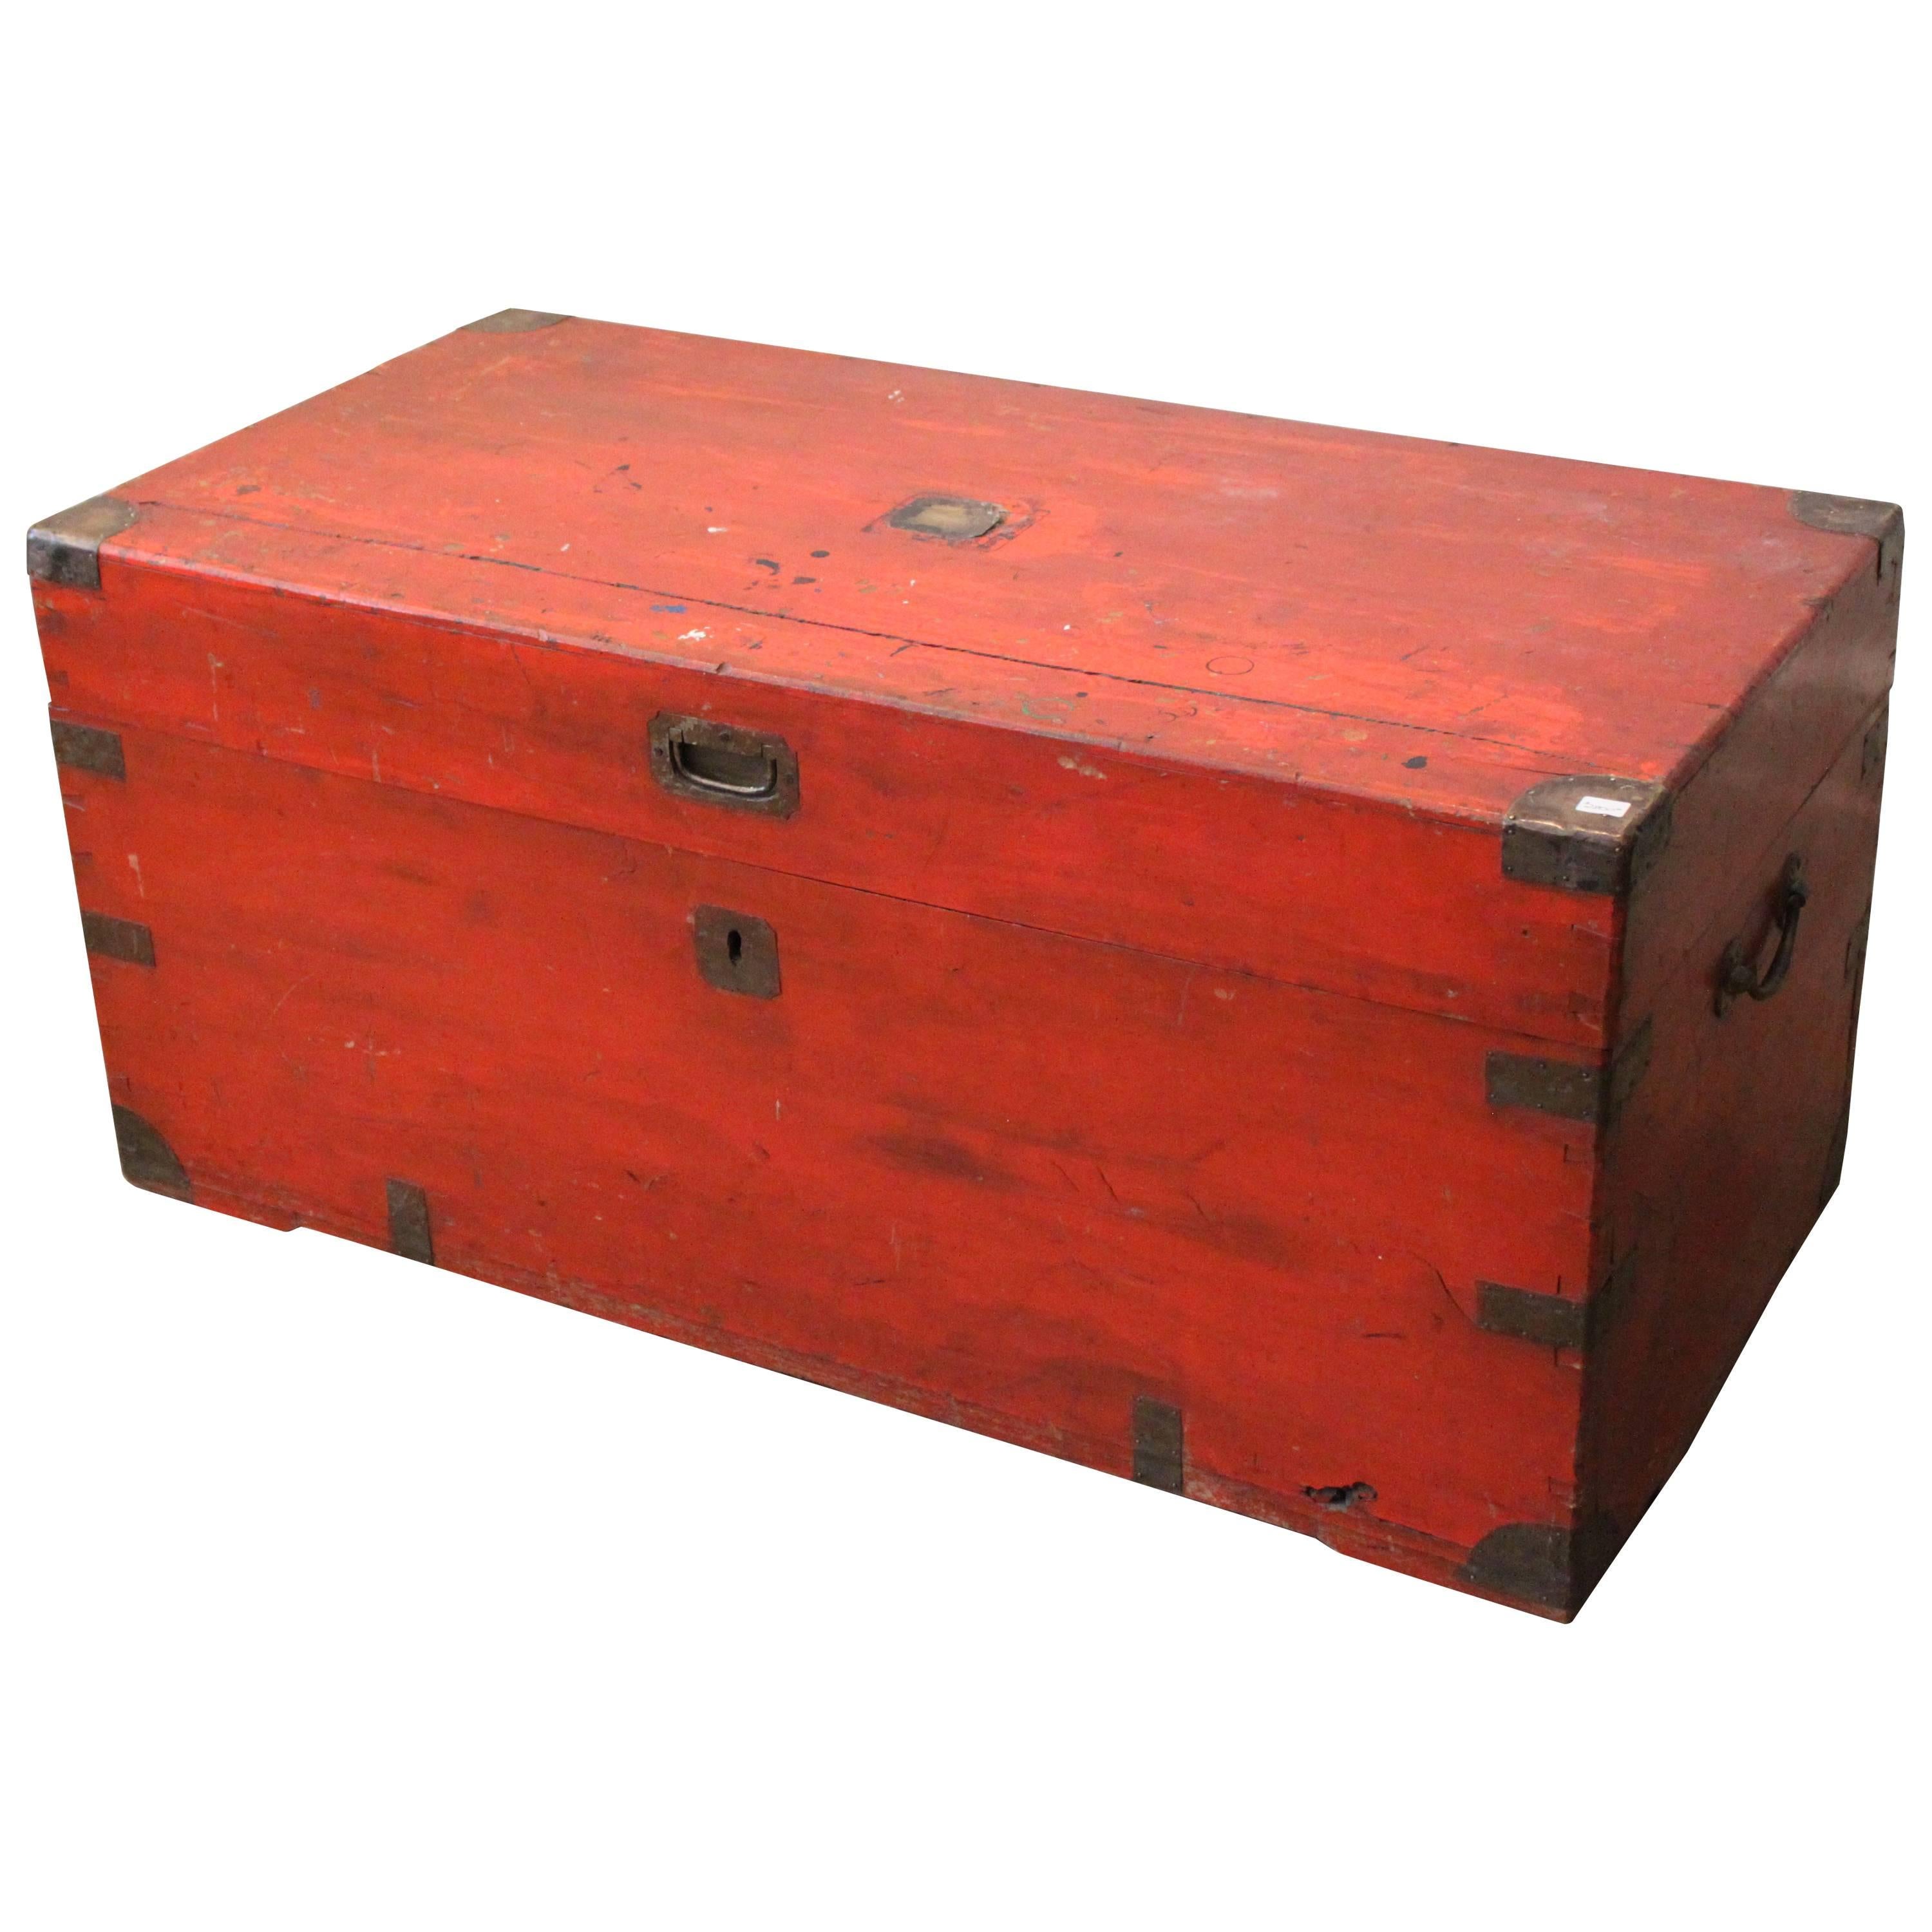 English Camphor Shipping Trunk in Orange Paint, Late 19th Century